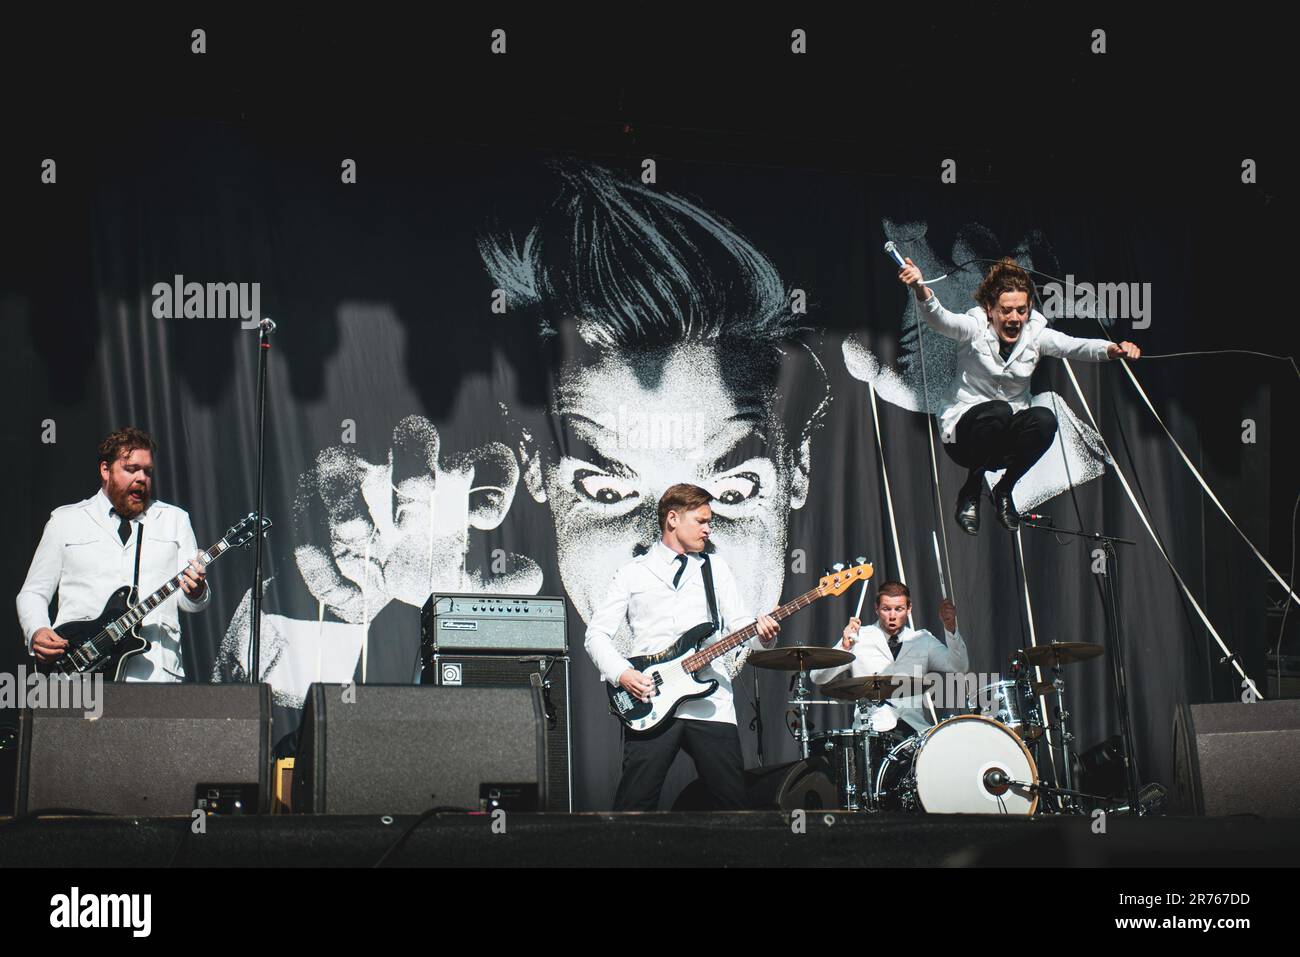 MUNICH, GERMANY ROCKAVARIA FESTIVAL: The Swedish band The Hives performing live on stage at the first edition of the Rockavaria Festival. Stock Photo